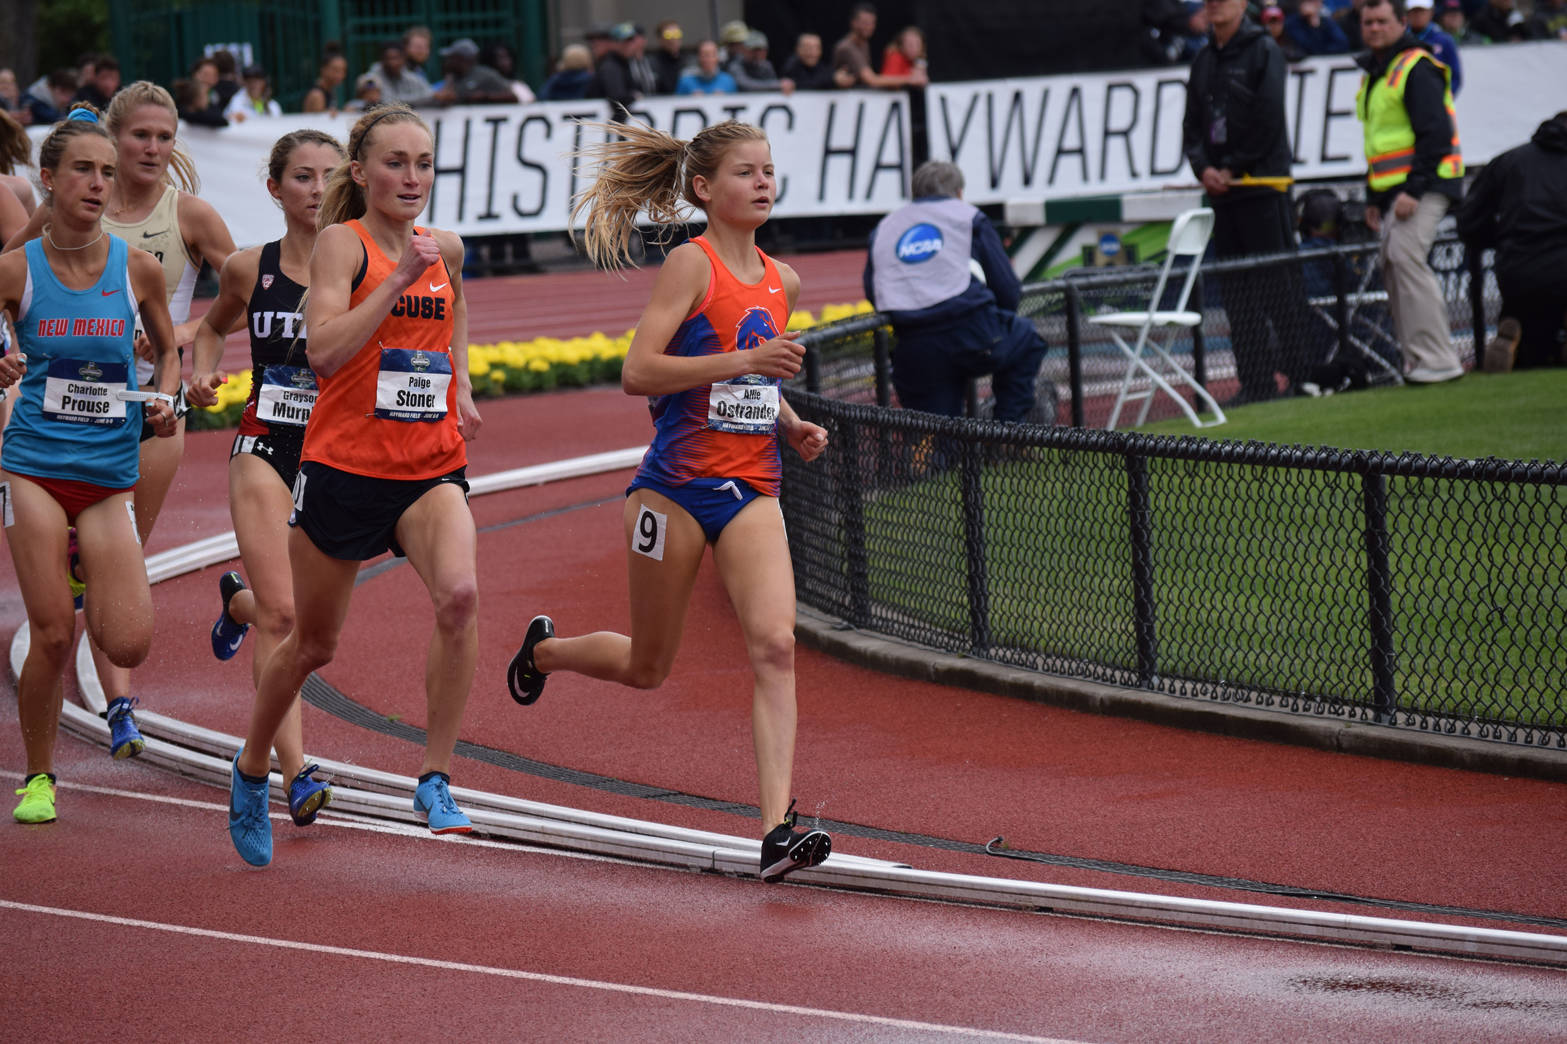 Boise State redshirt sophomore Allie Ostrander rounds a corner on the way to defending her 3,000-meter steeplechase crown at the NCAA Outdoor Track and Field Championships on Saturday, May 9, 2018. (Photo provided by Boise State Athletics)